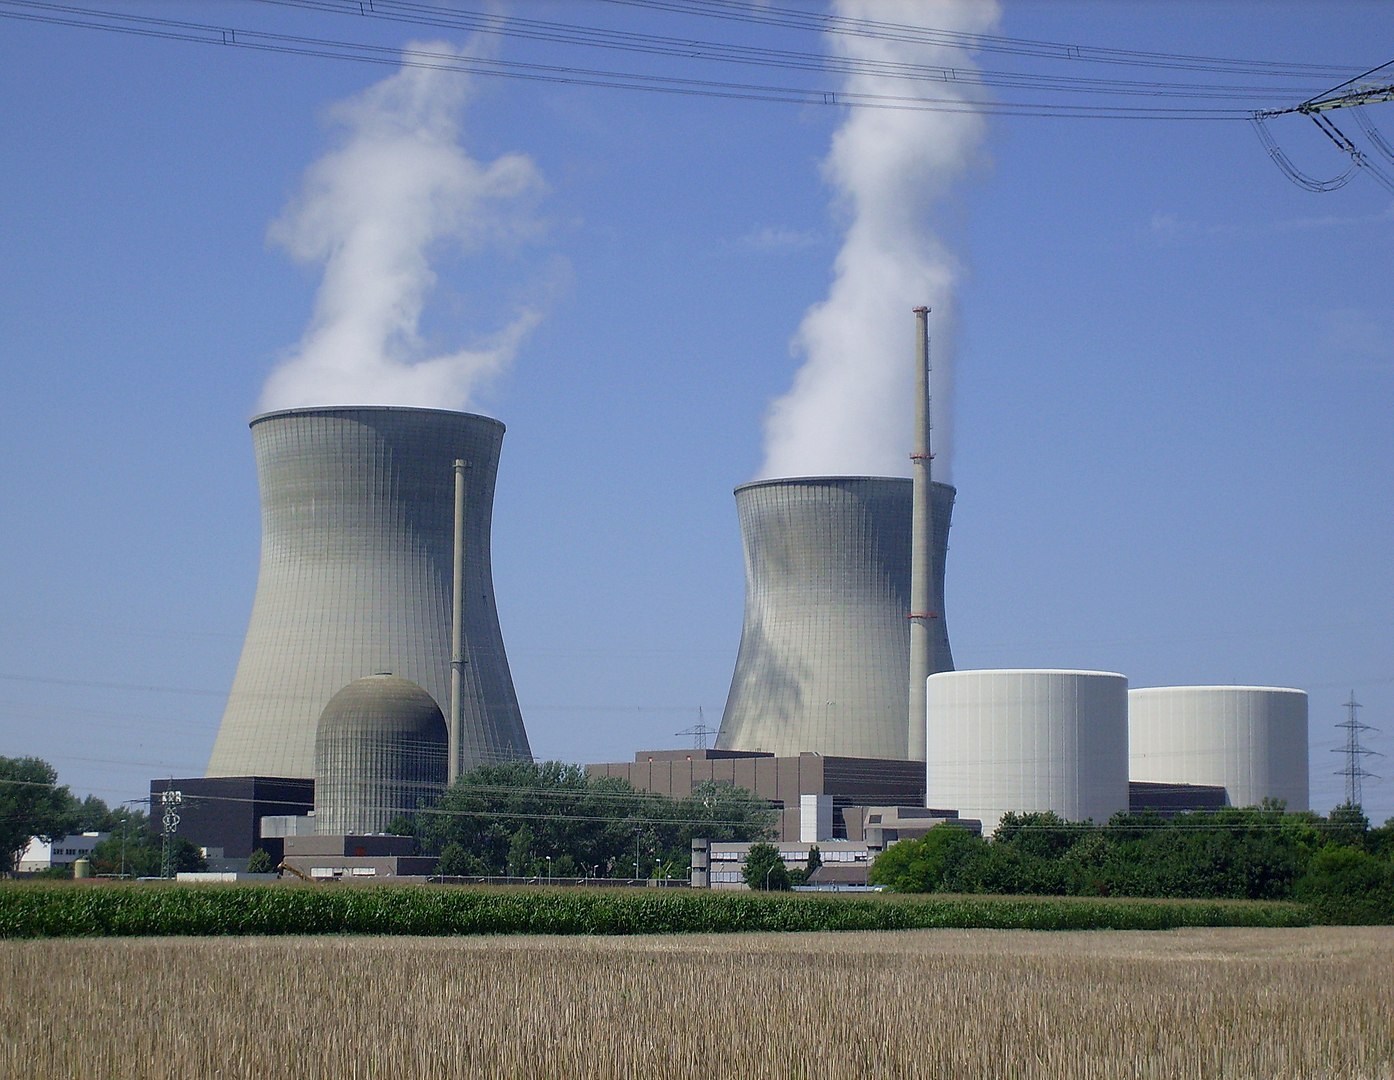 The Gundremmingen Nuclear Power Plant in Germany